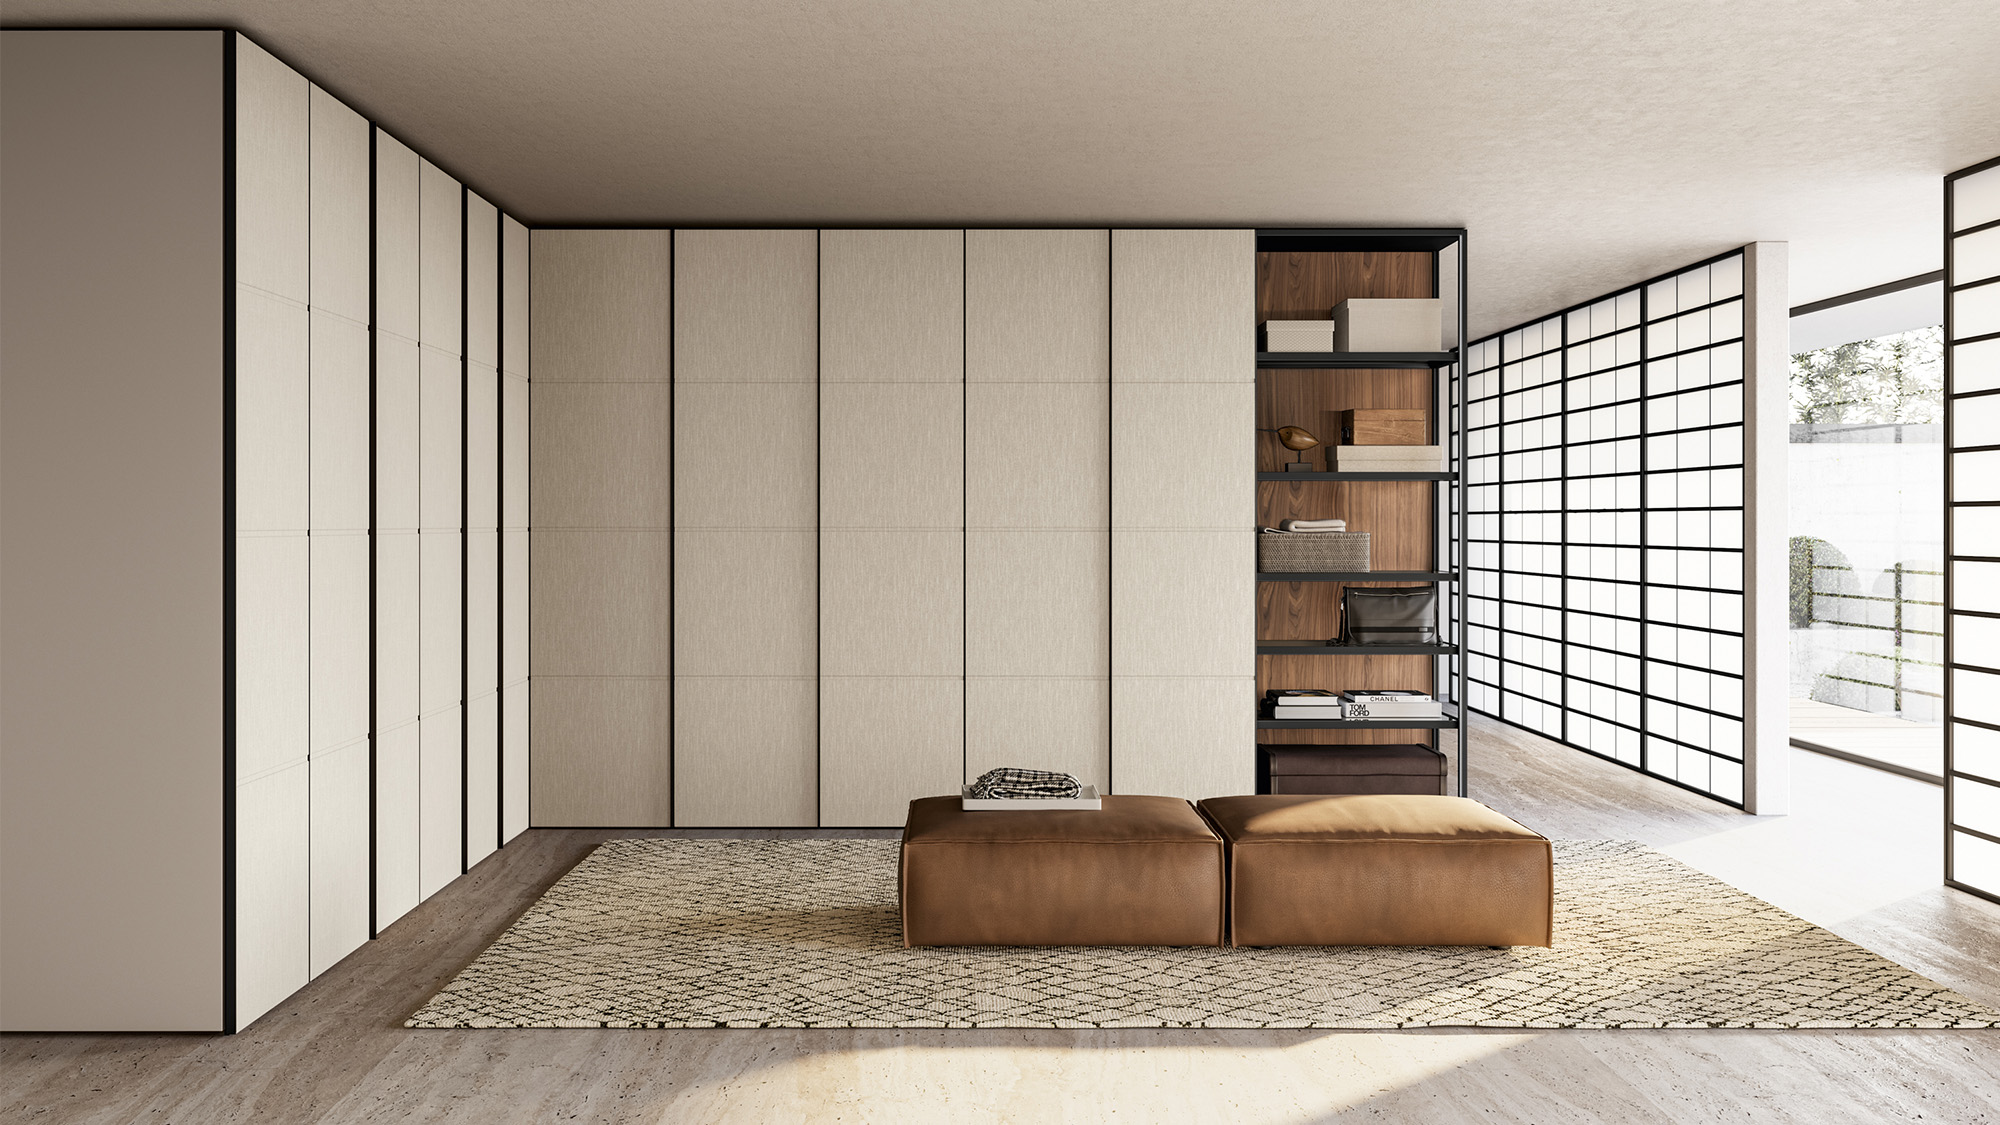 Tela wardrobe with fabric-covered hinged door and walk-in closet Scena | Dallagnese